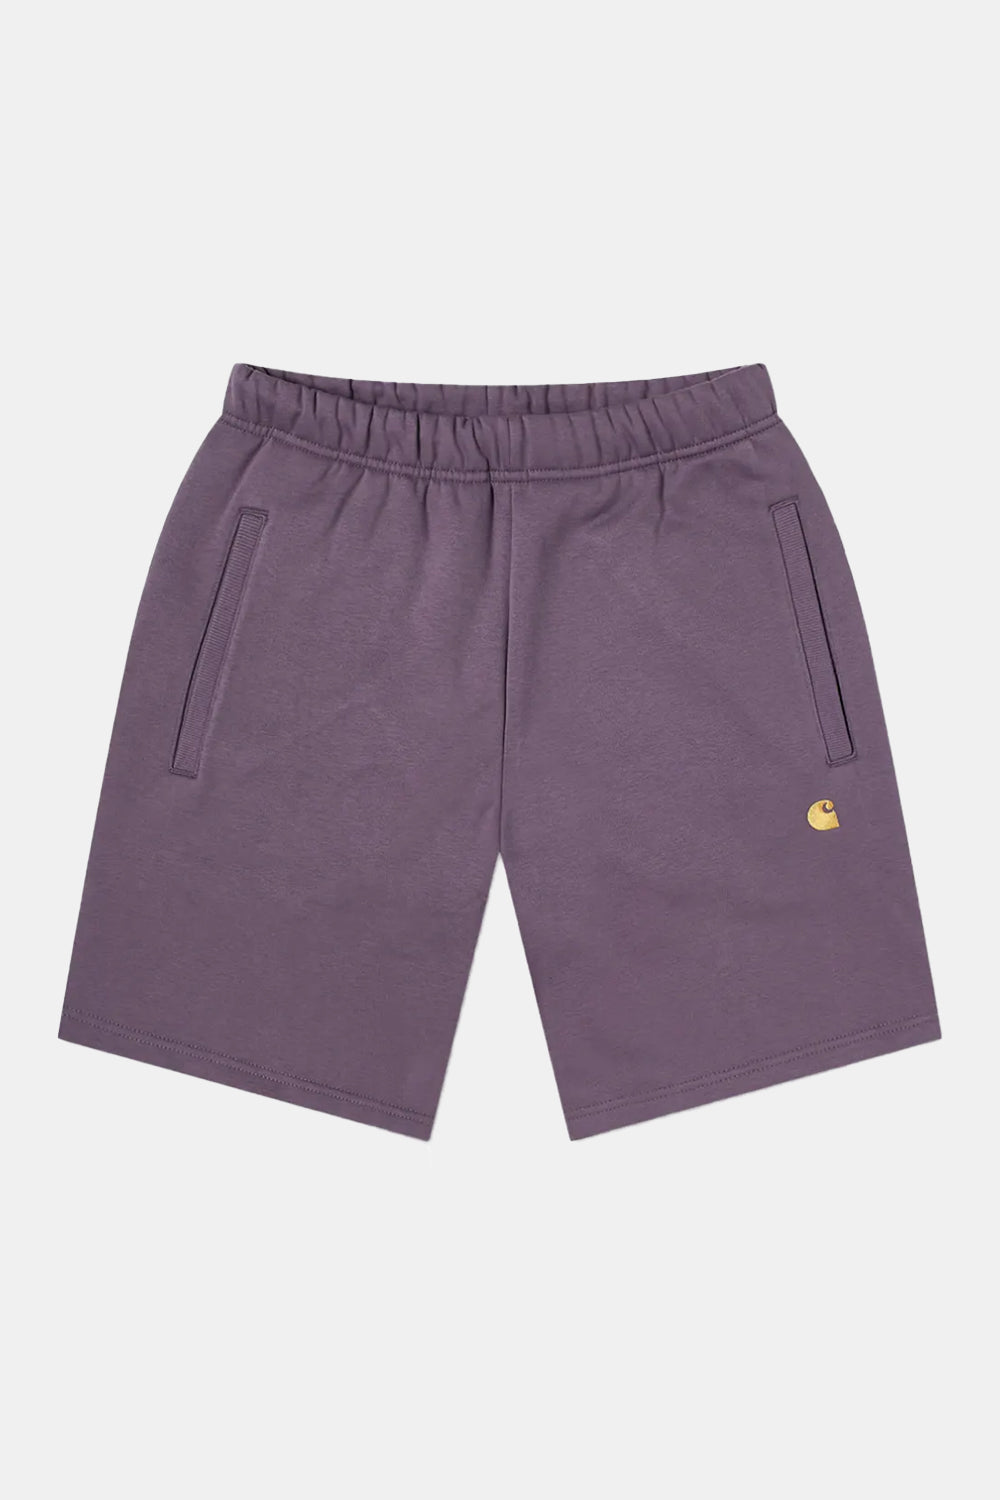 Carhartt WIP Chase Sweat Shorts (Provence & Gold)